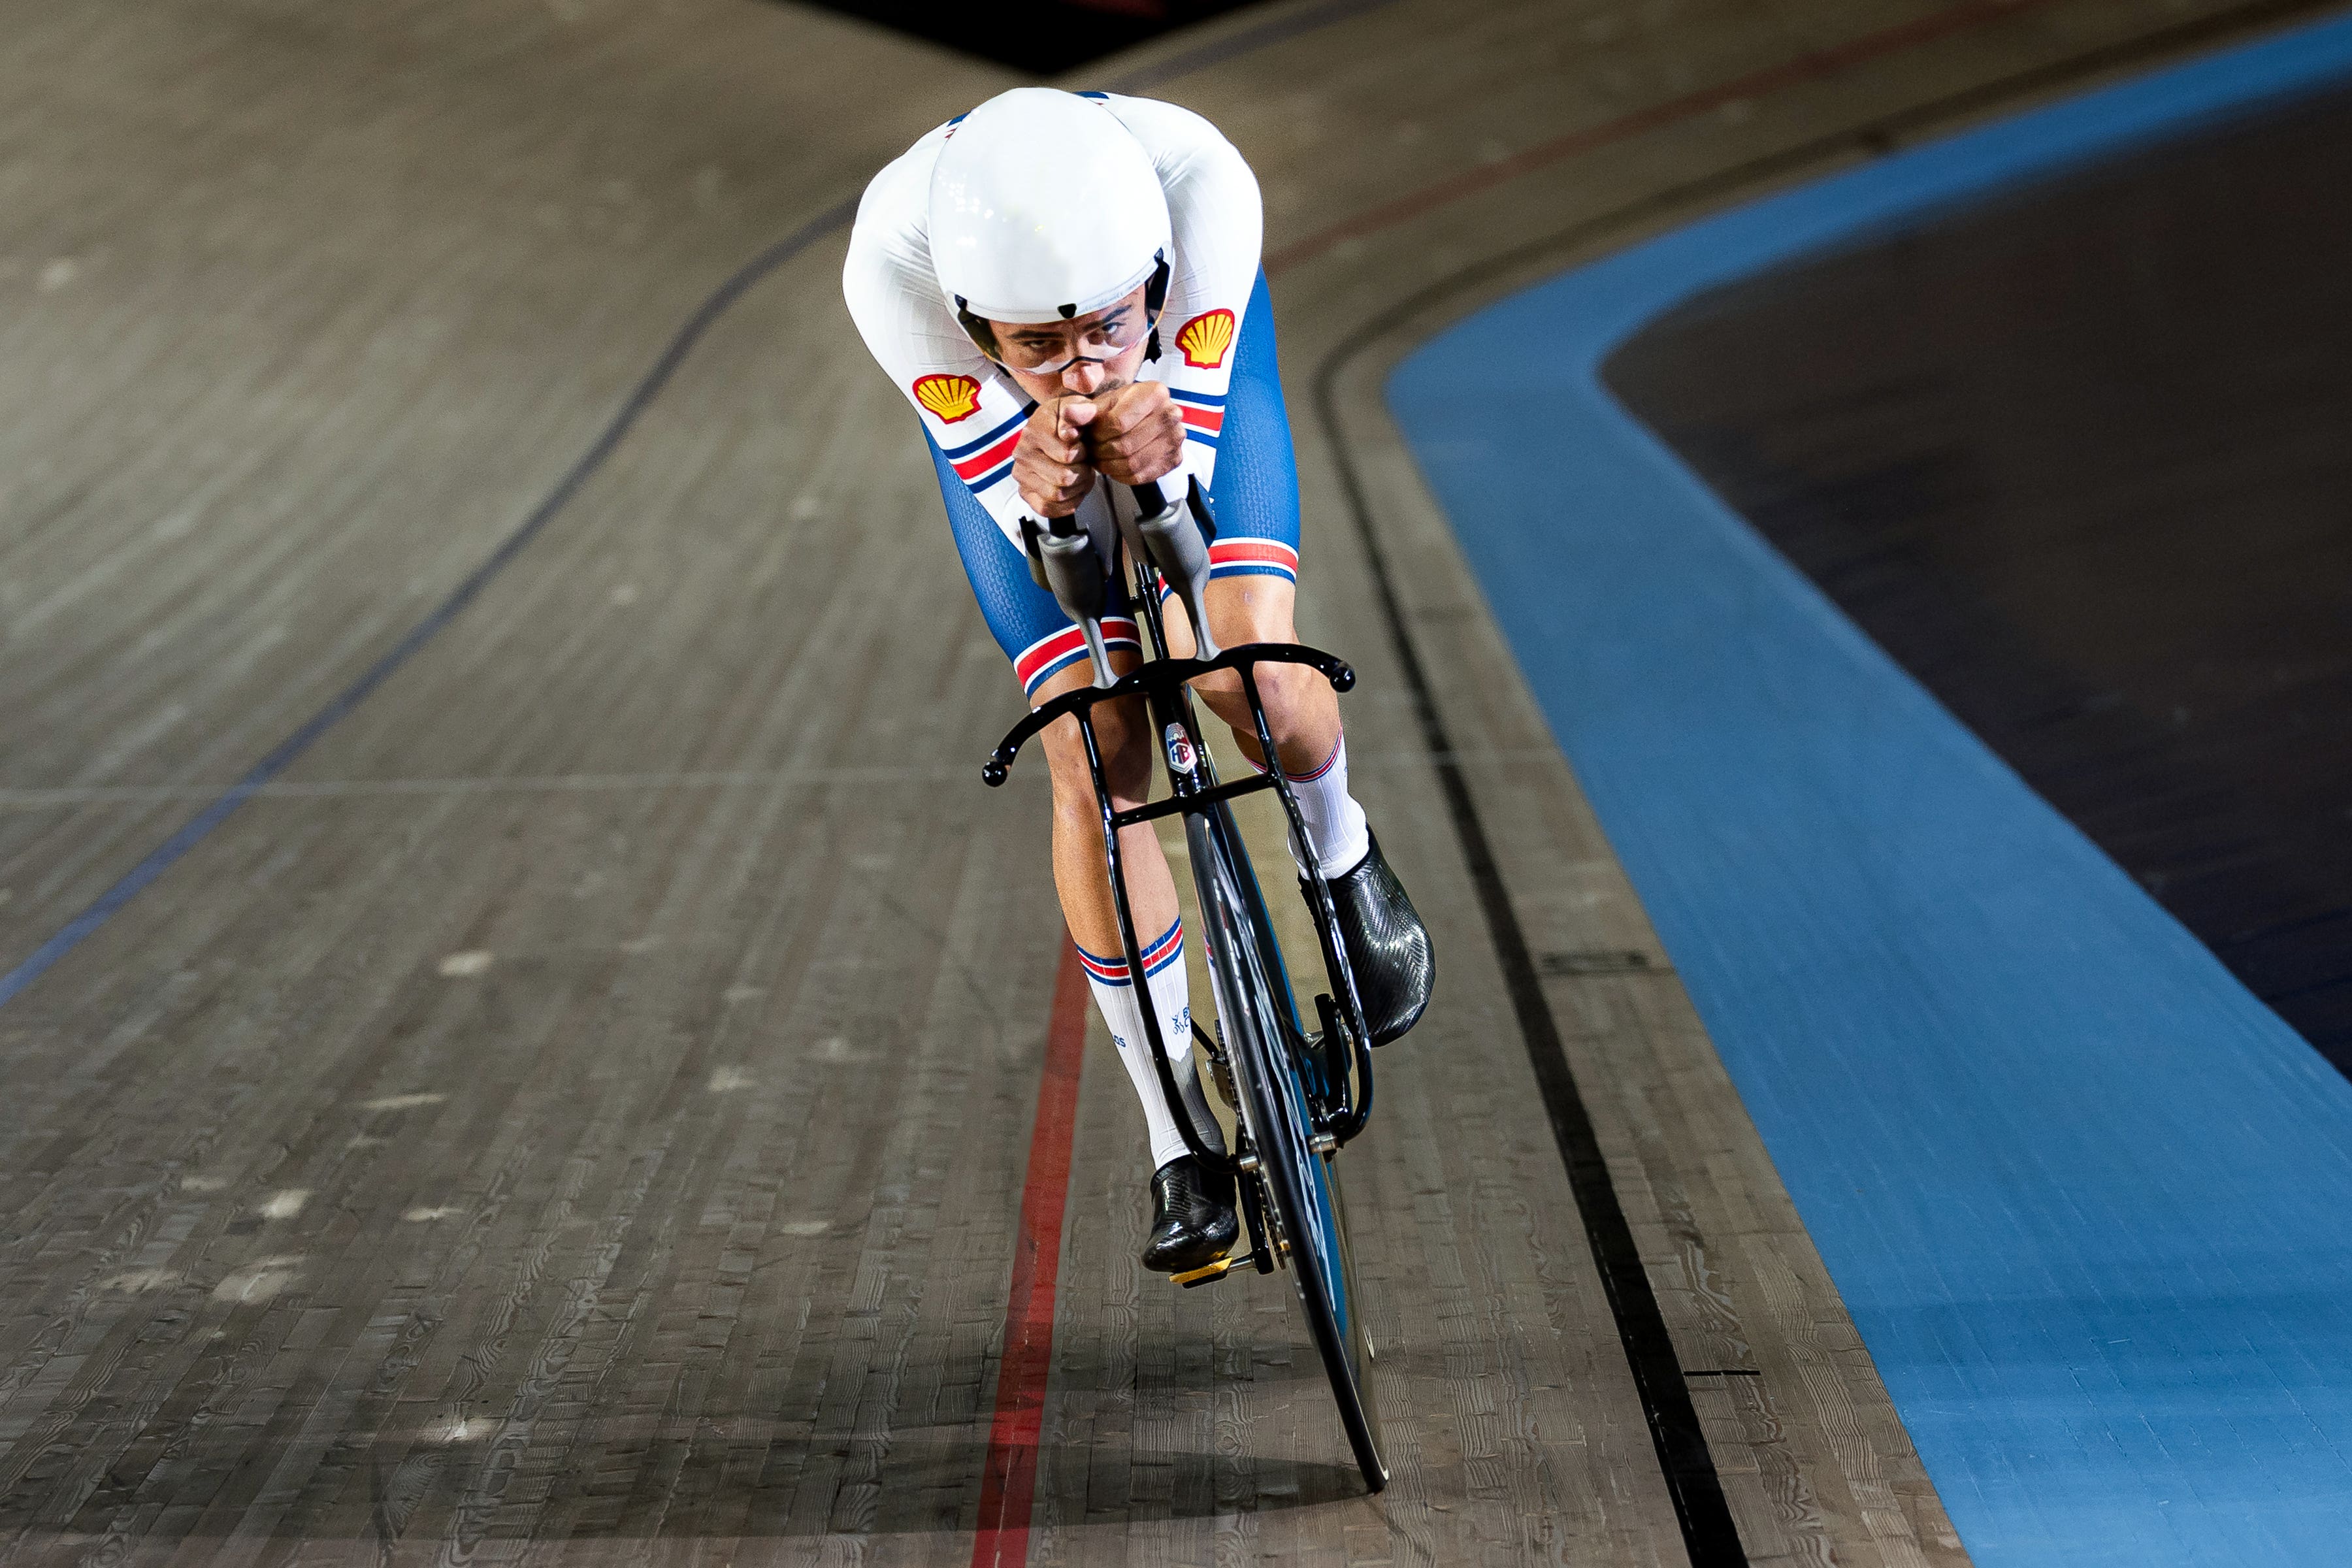 British Cycling set to debut Olympic bike at World Championships The